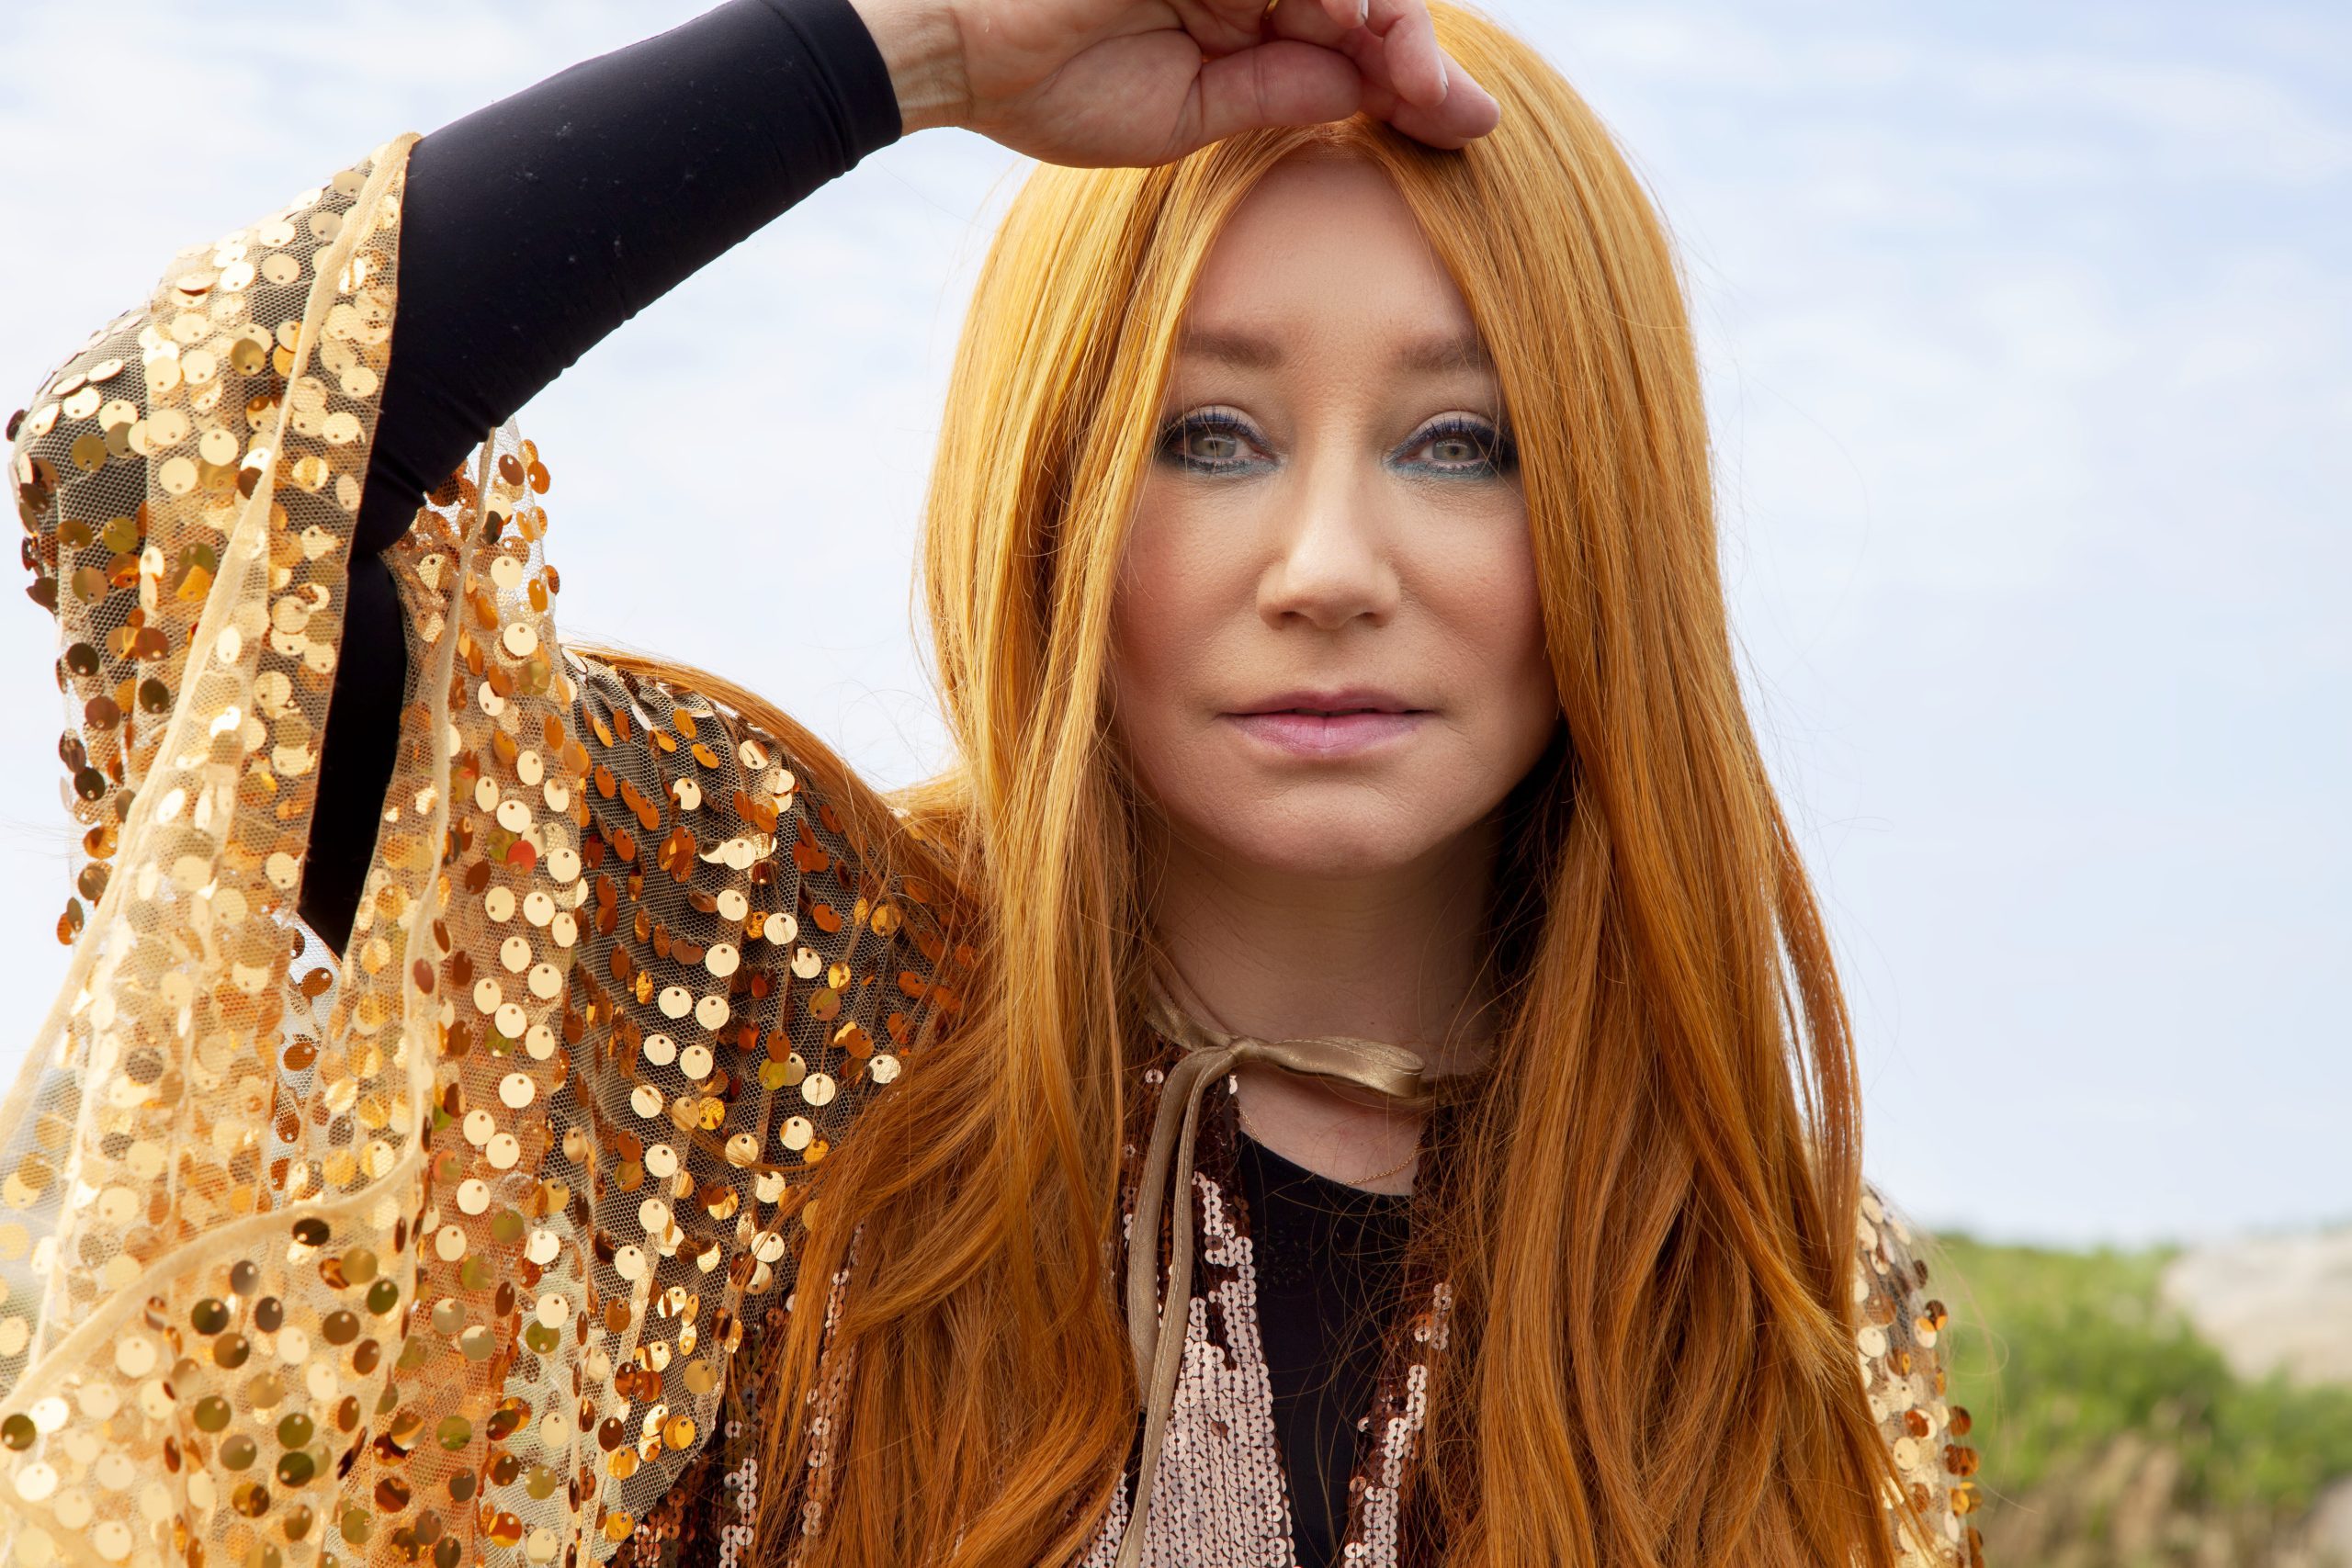 Tori Amos Announces U.S. Tour with Los Angeles Date at Greek Theatre